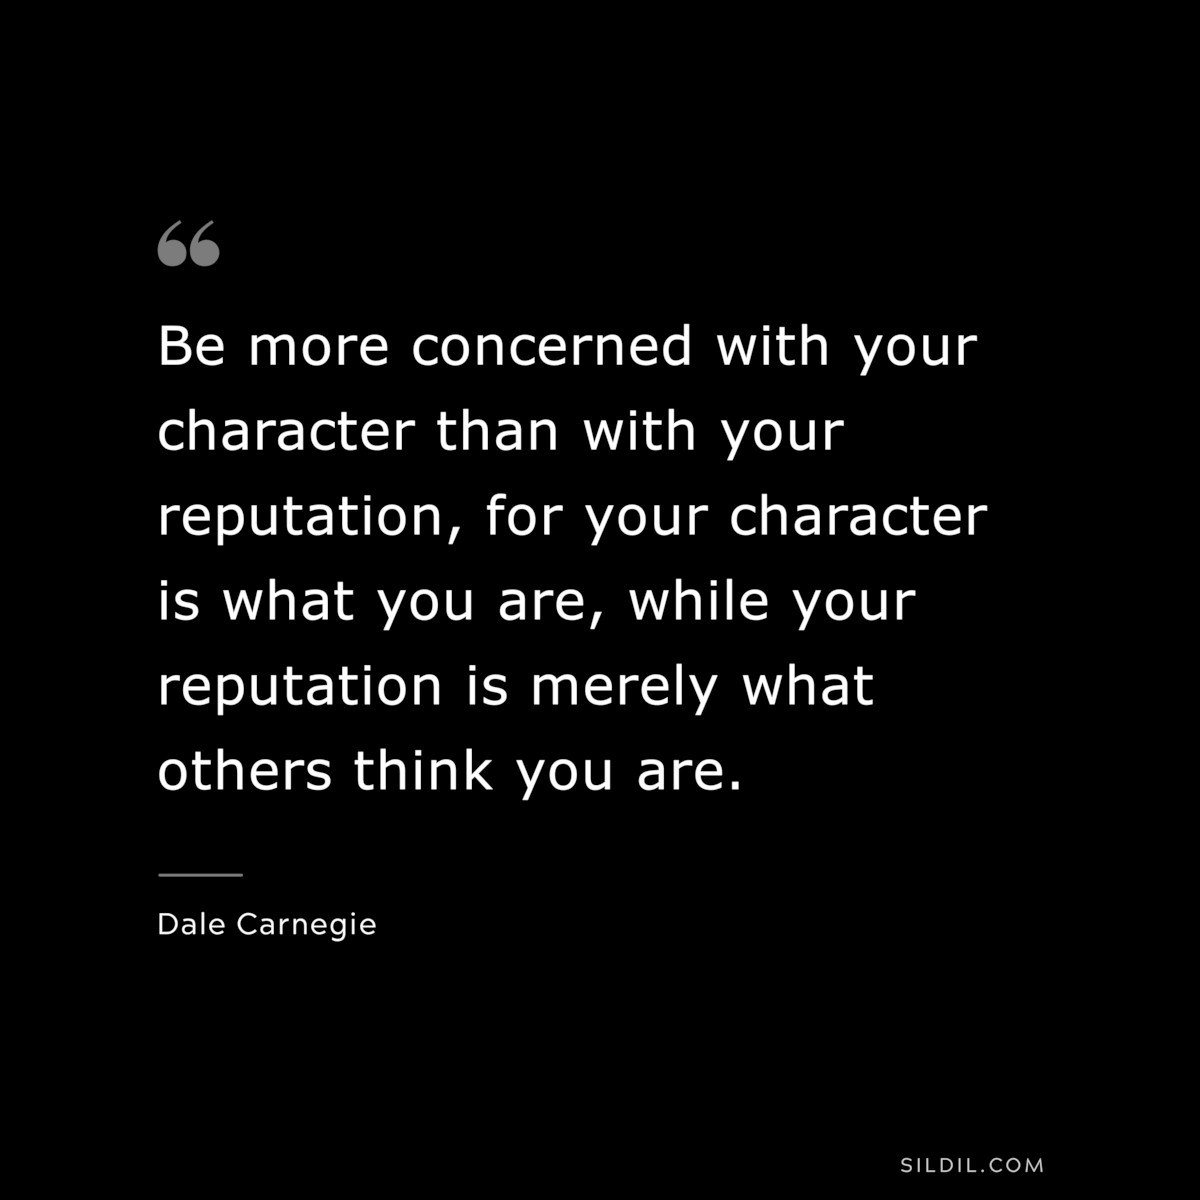 Be more concerned with your character than with your reputation, for your character is what you are, while your reputation is merely what others think you are.― Dale Carnegie